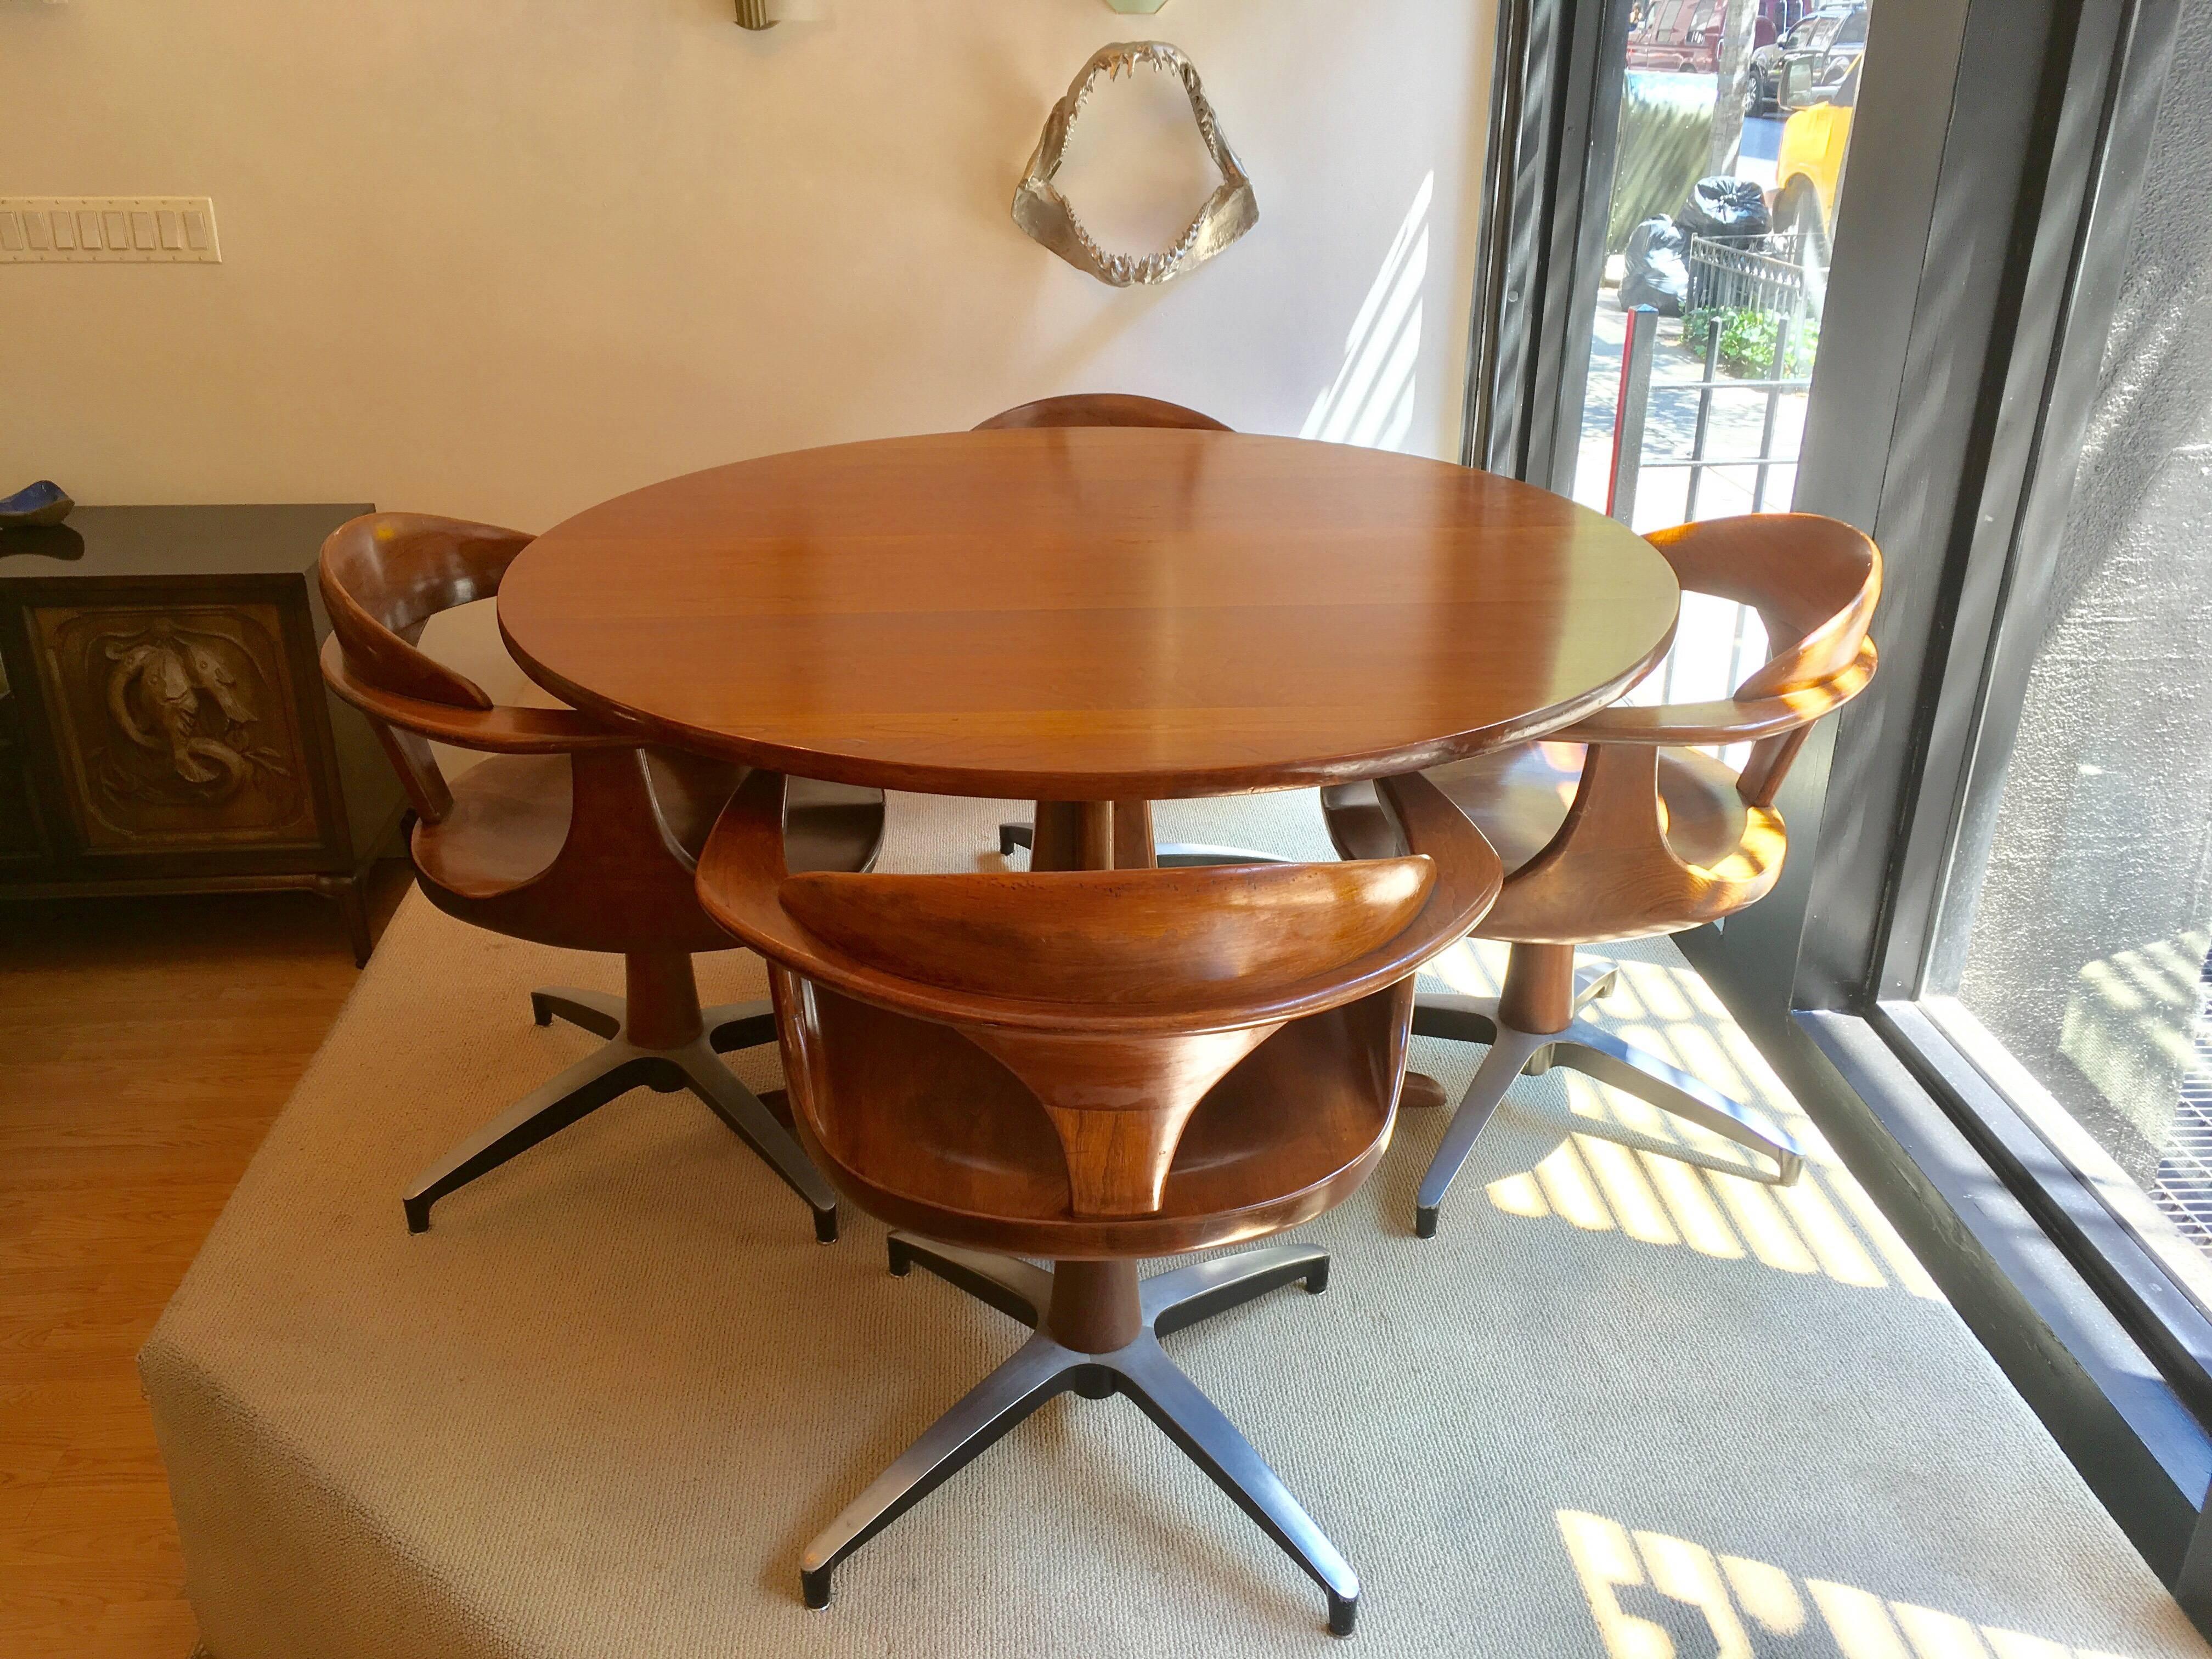 An original American 1960s sculptural hardwood cherry with a medium brown finish and curved Spage Age steel bases. The set of from the famed American furniture maker, Heywood Wakefield, and is part of their last line which debuted in the 1960s,